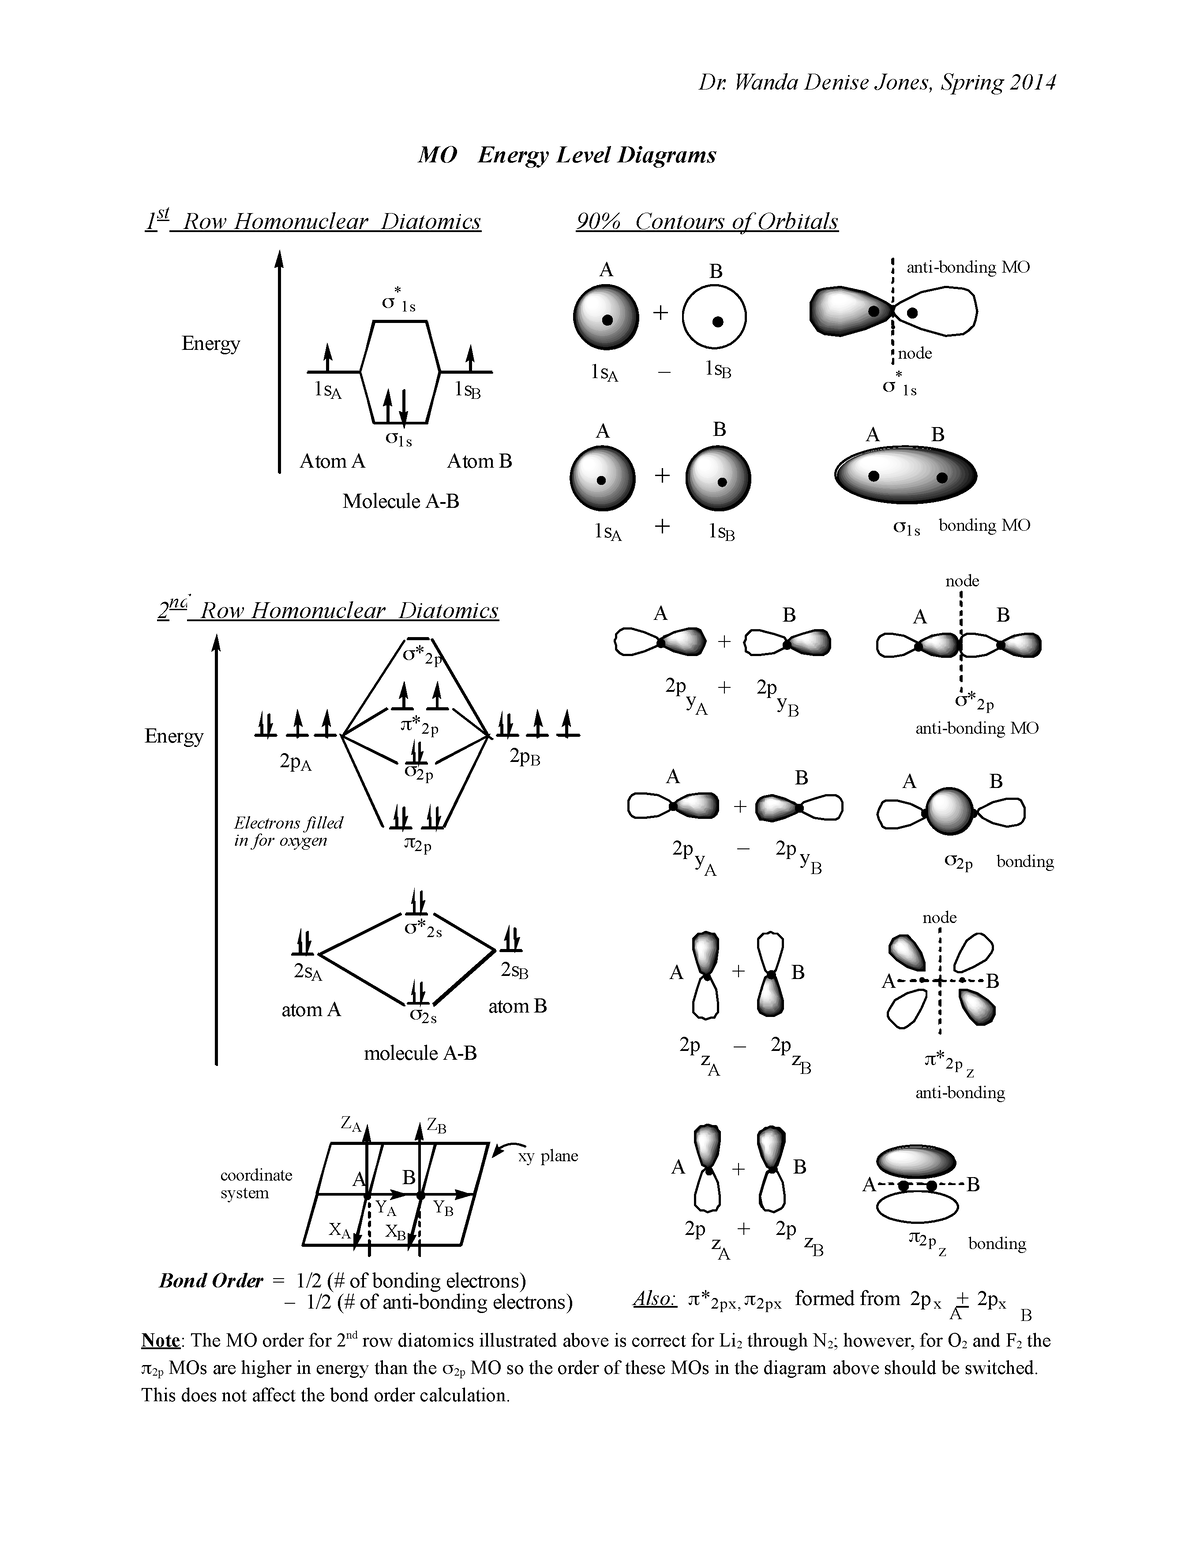 MO diagrams - worksheets for general chemistry class. - Dr. Wanda ...